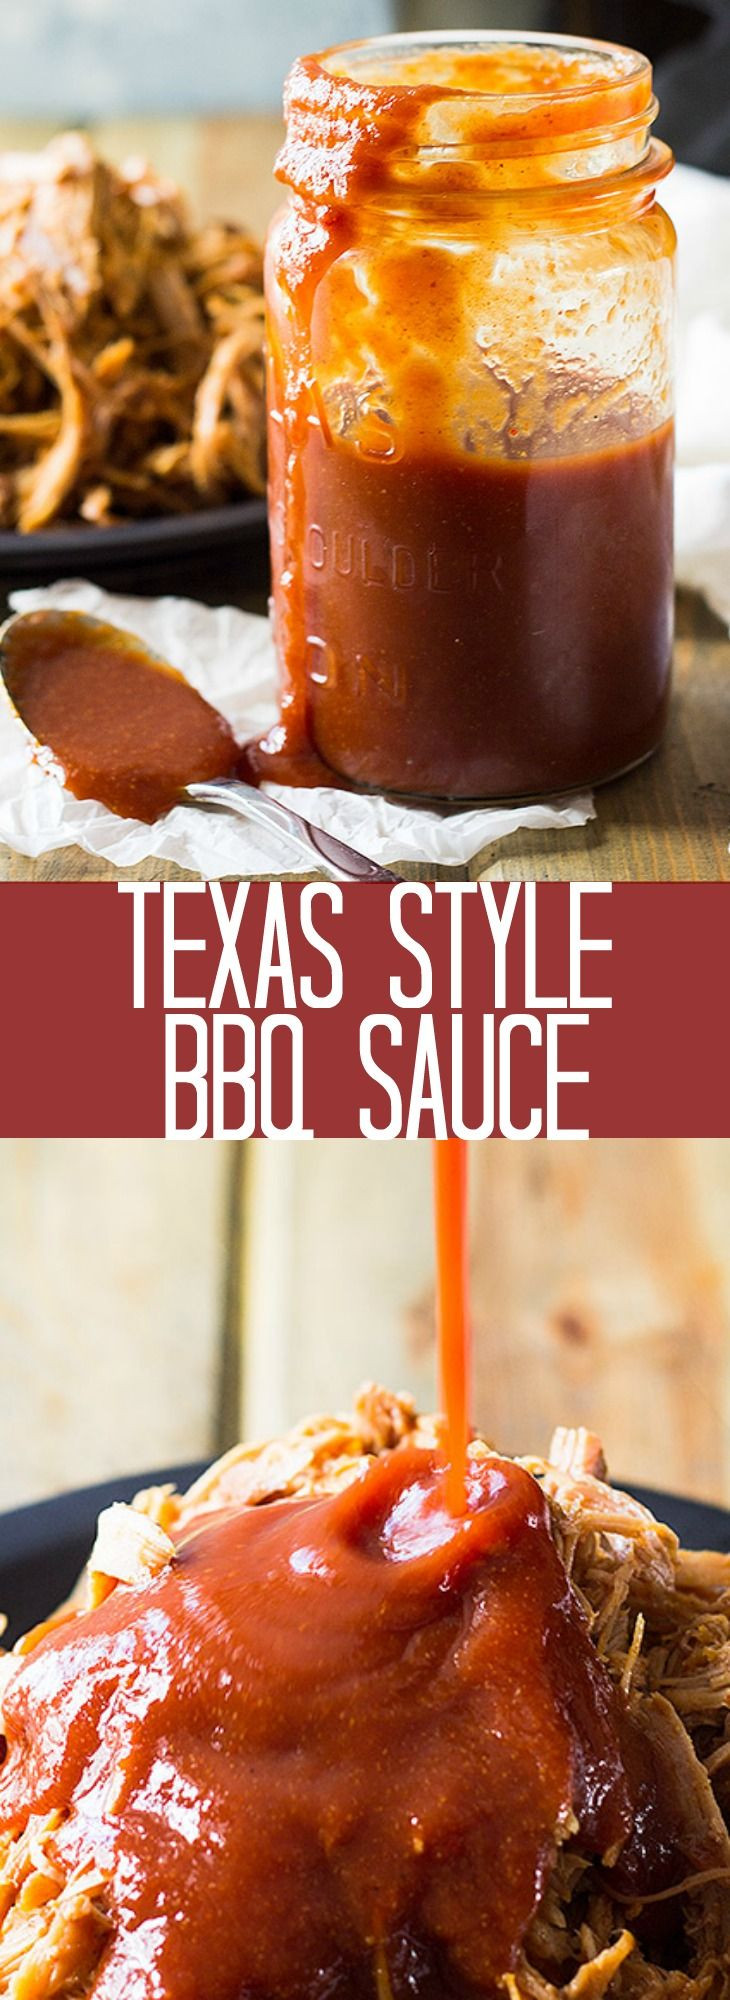 Texan Bbq Sauce Recipe
 This Texas Style BBQ Sauce is a great addition to your bbq